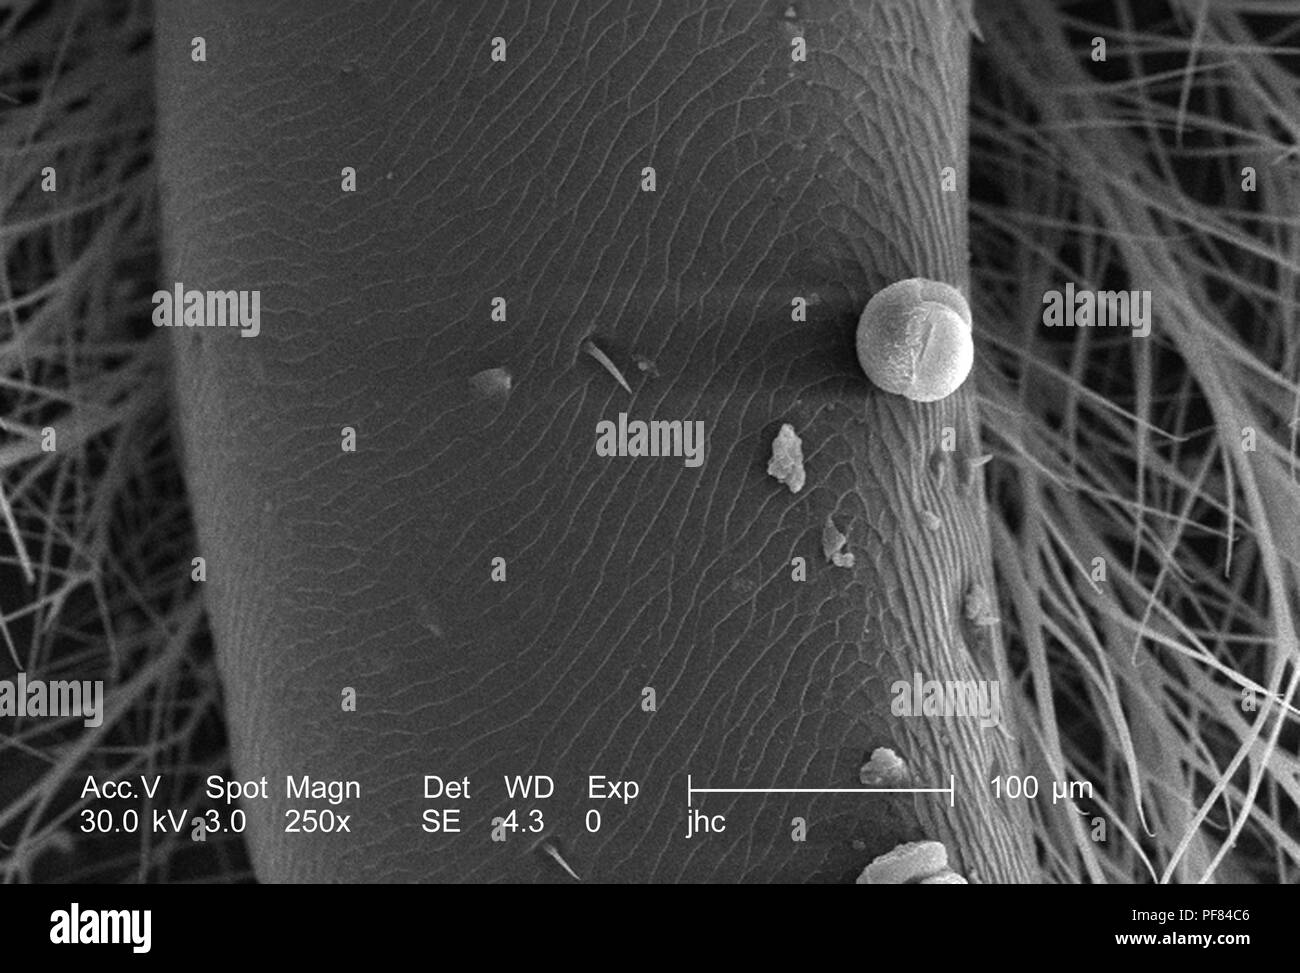 Ultrastructural morphologic features on the surface of a carpenter bee's head (Xylocopa virginica) found in Decatur, Georgia, depicted in the 250x magnified scanning electron microscopic (SEM) image, 2006. Image courtesy Centers for Disease Control (CDC) / Janice Carr, Oren Mayer. () Stock Photo